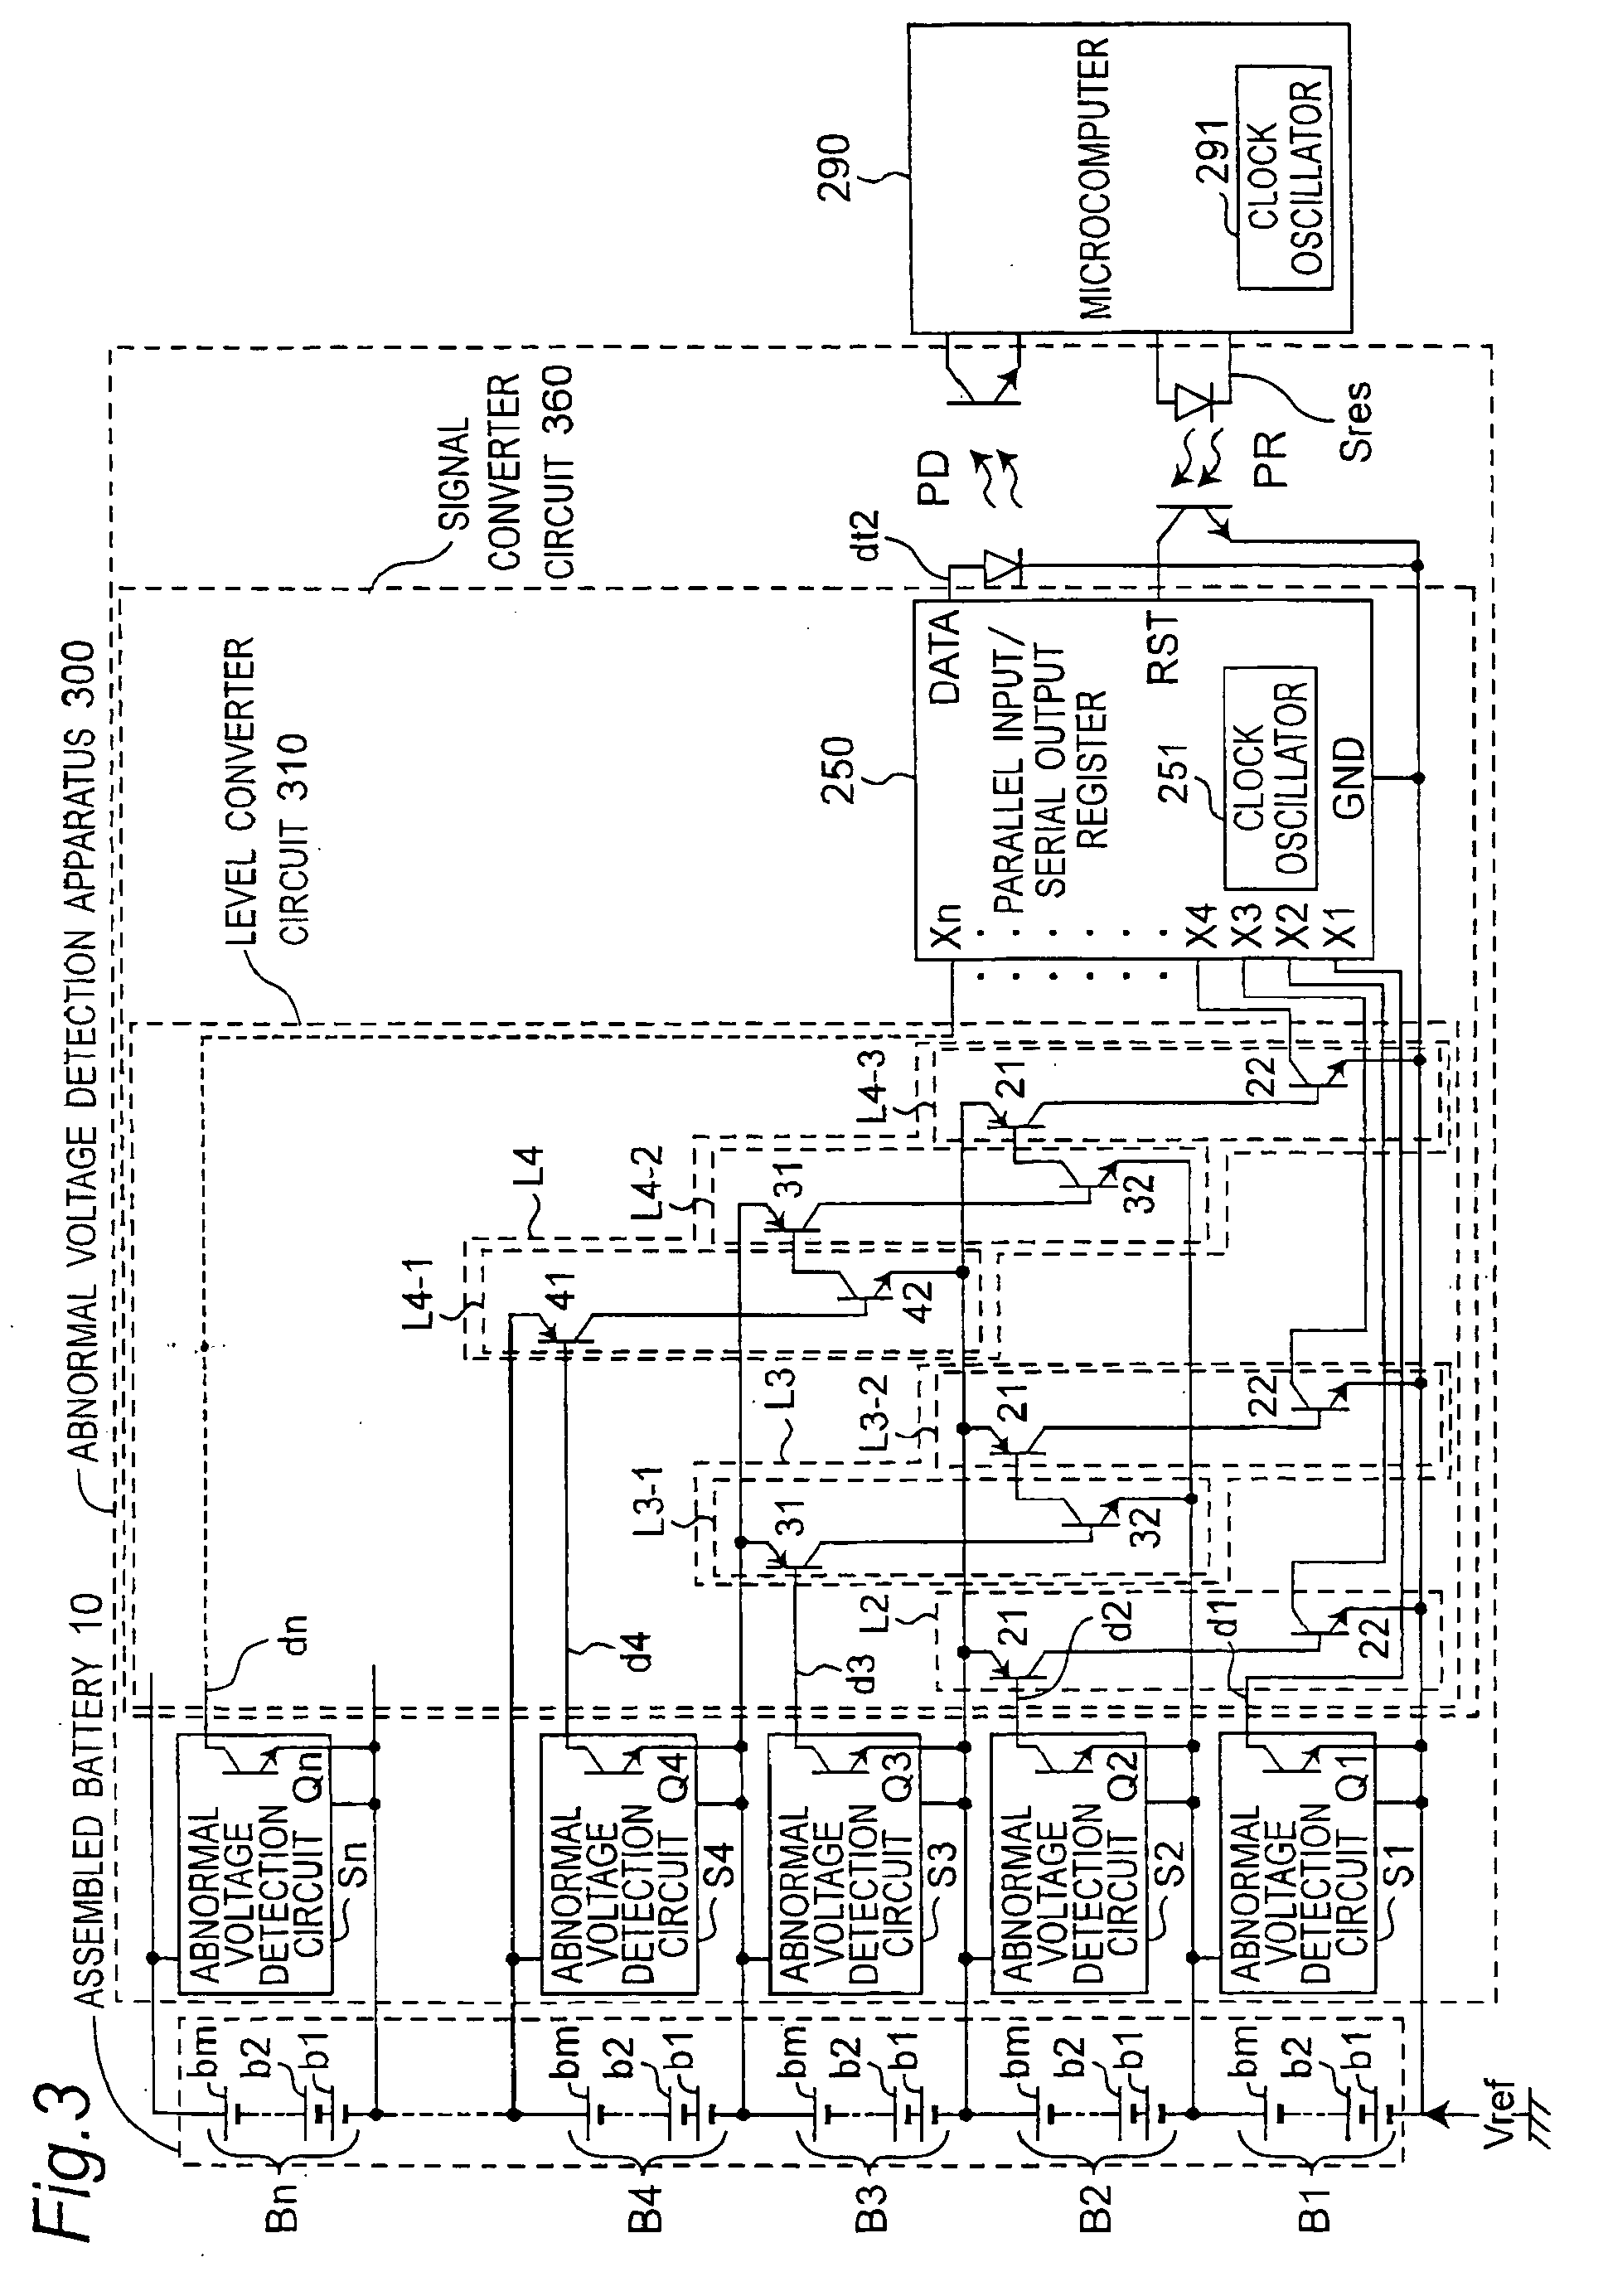 Abnormal voltage detection apparatus for detecting voltage abnormality in assembled batterey